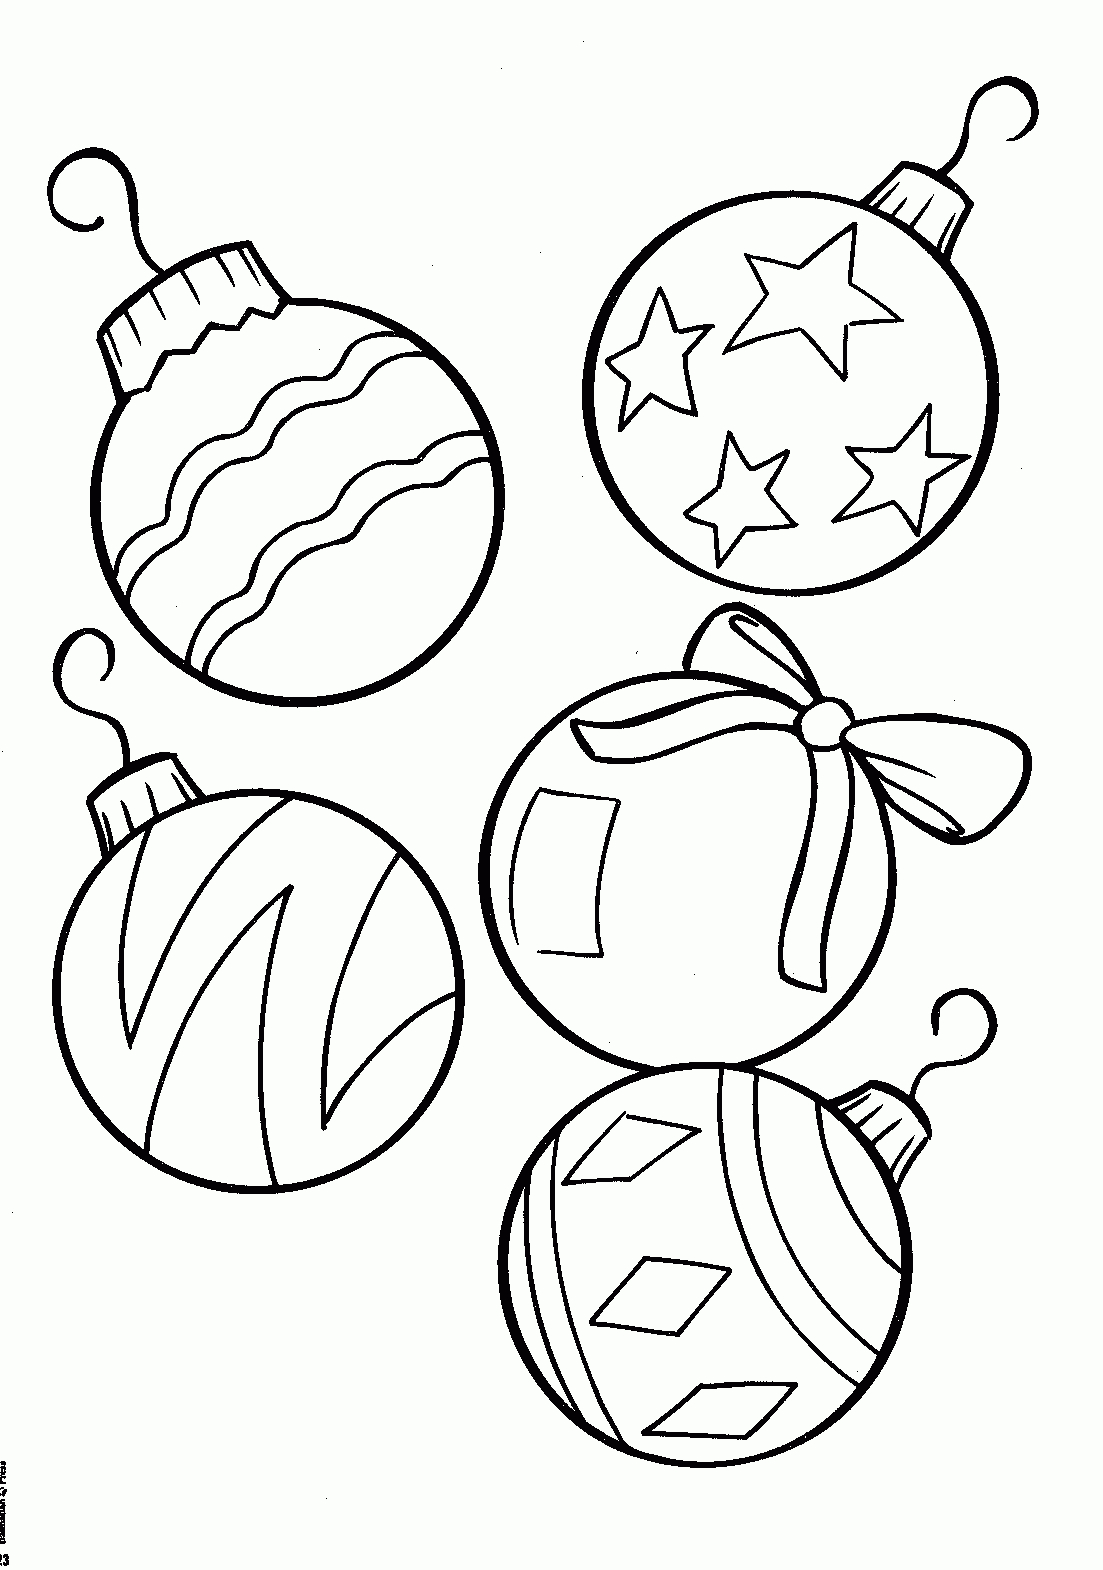 Coloring ~ Coloring Christmas Ornament Color Pages Free Printable - Free Printable Christmas Tree Ornaments To Color